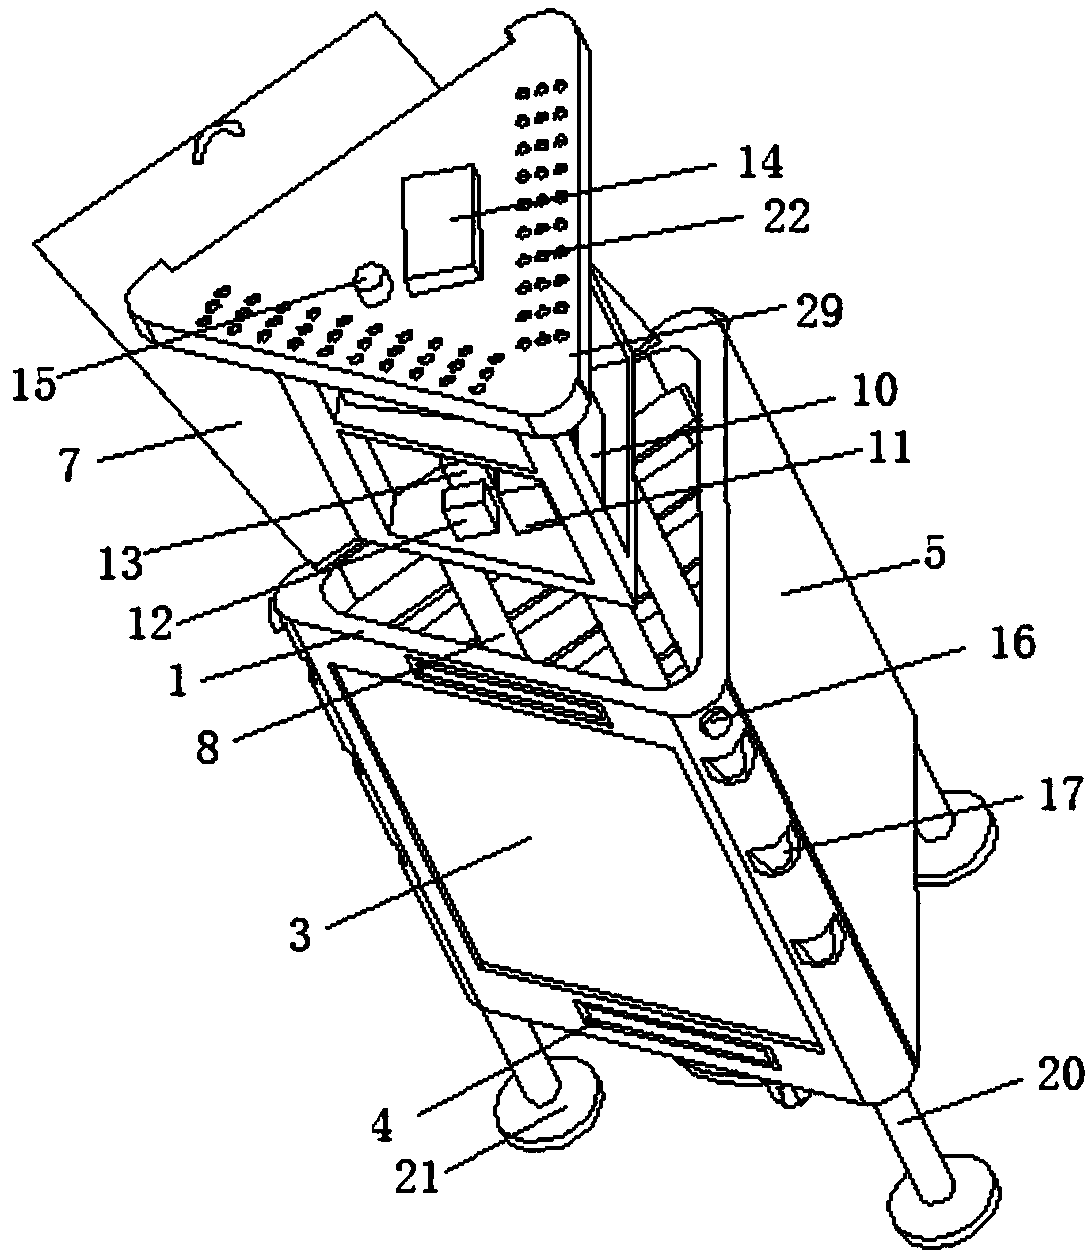 Automatic control information technology knowledge display device